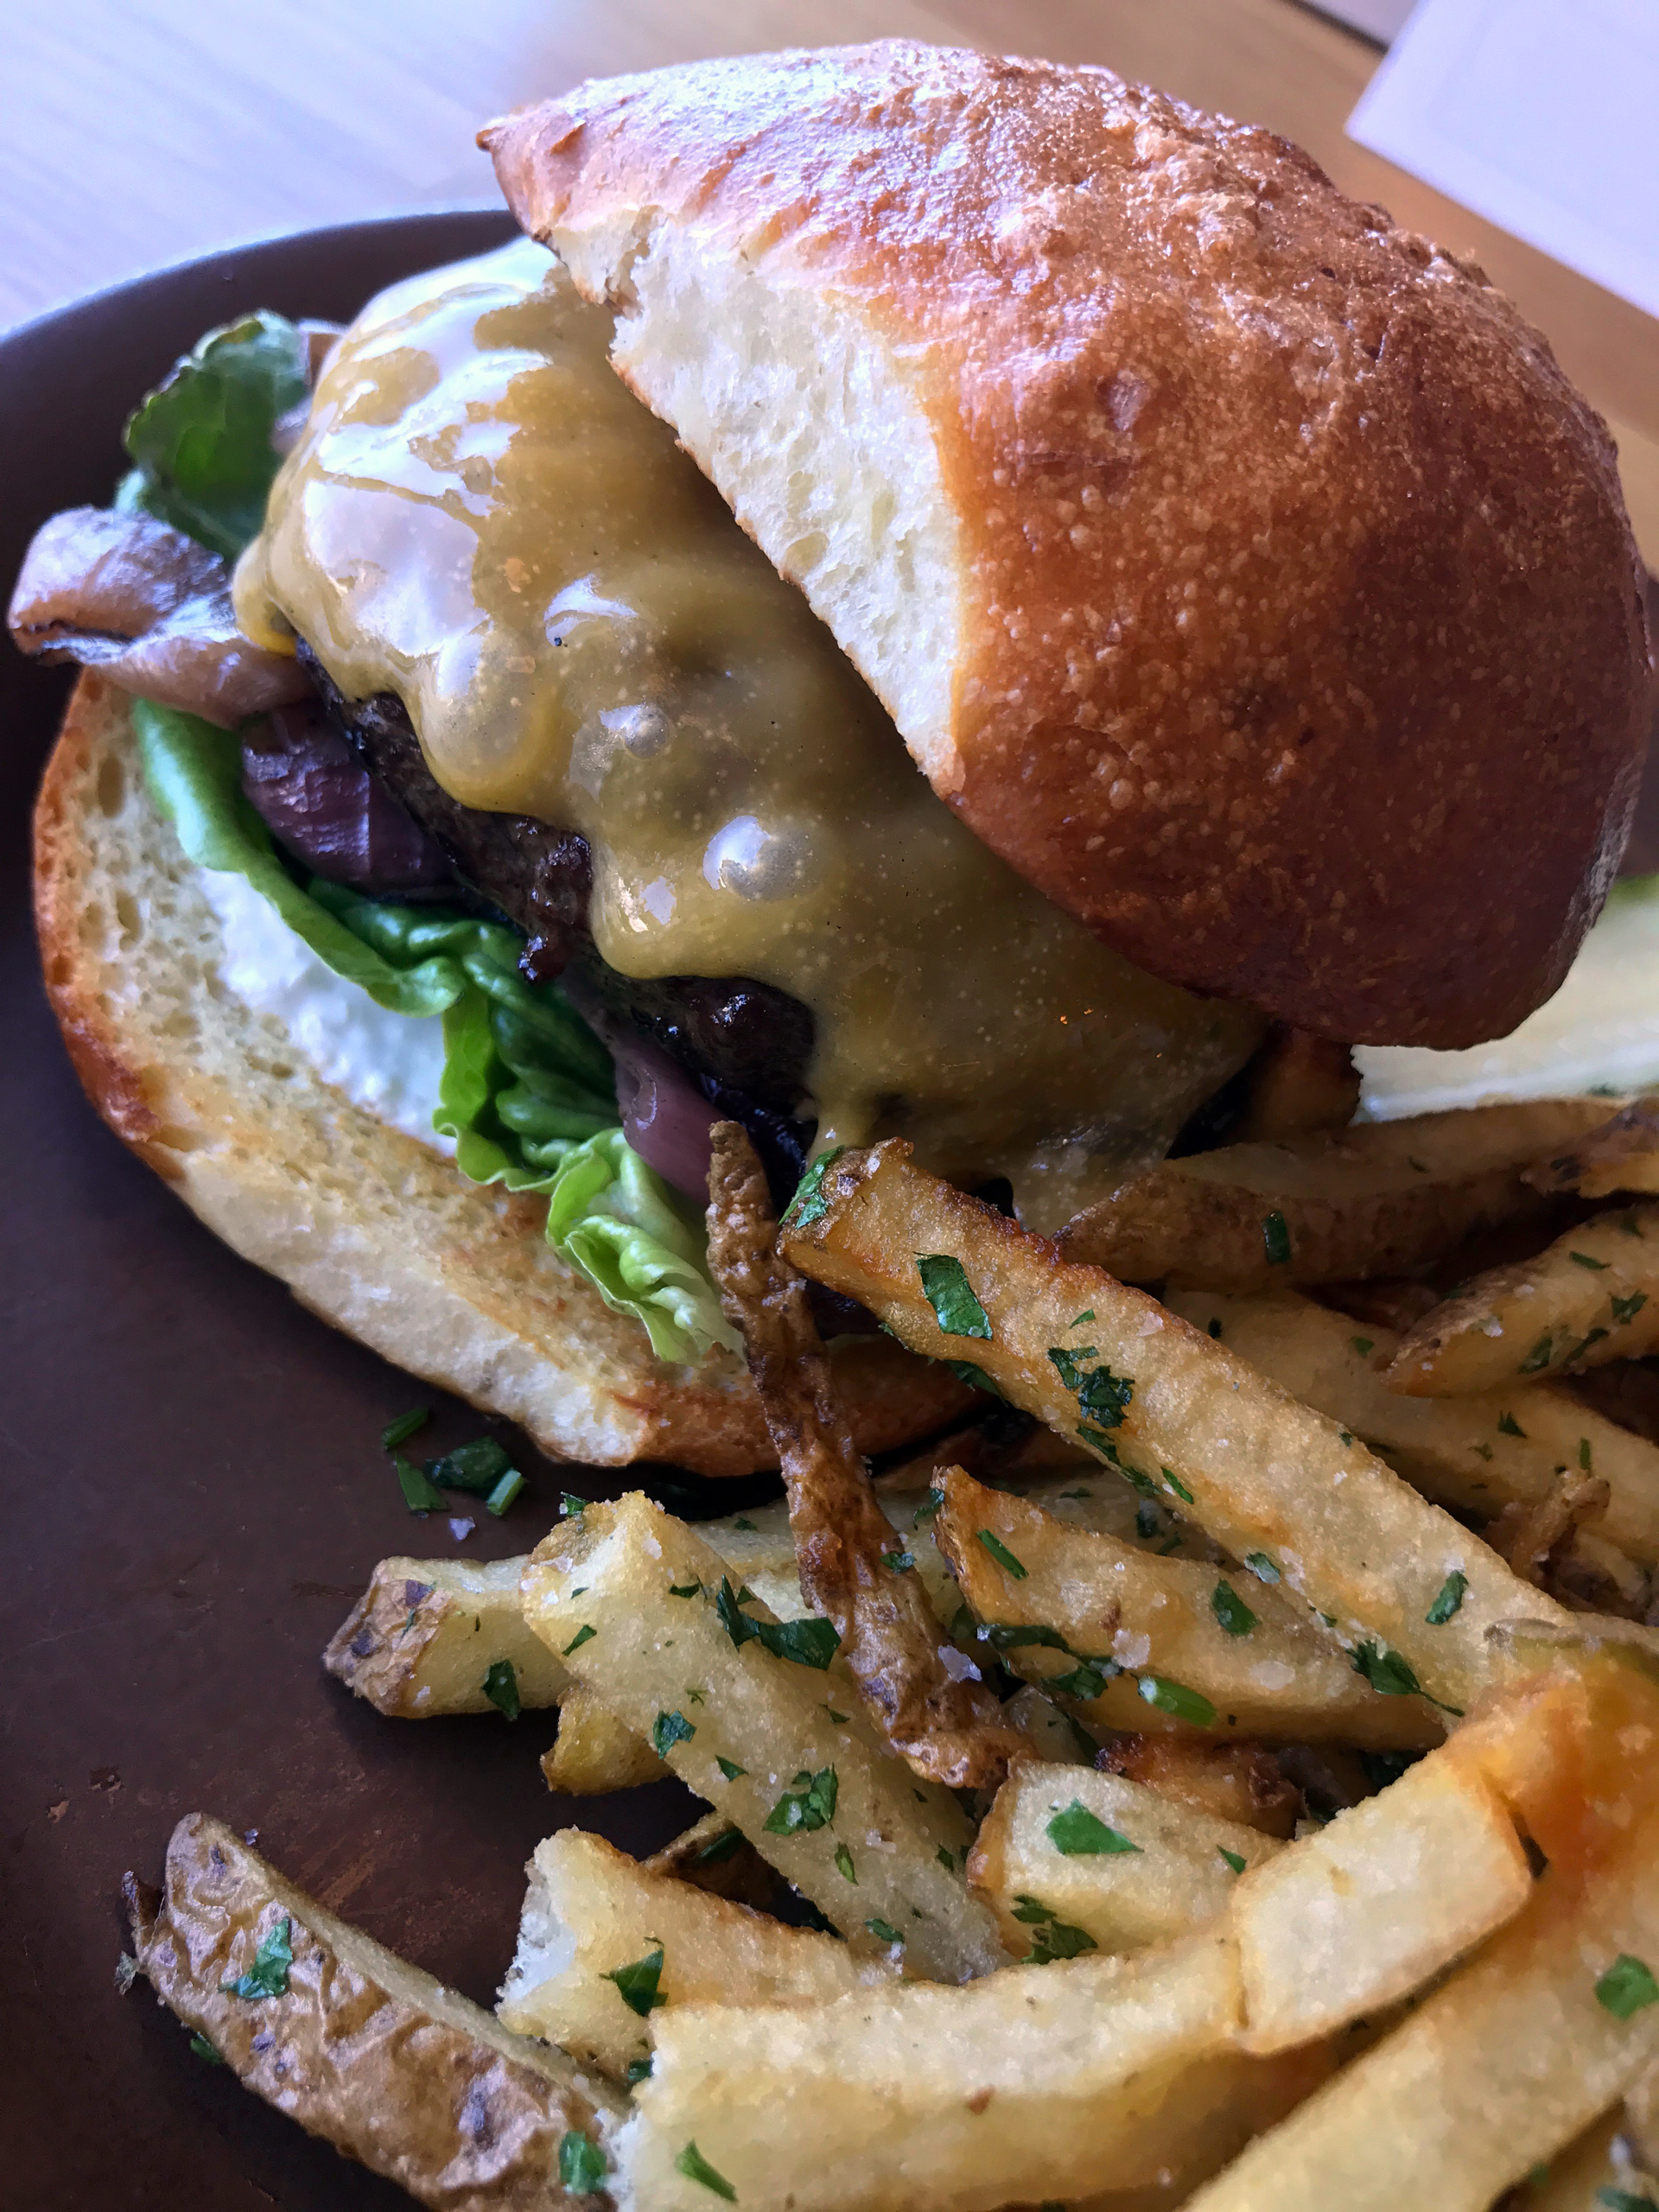 Limewood’s classic burger, served up in a resort ambiance.